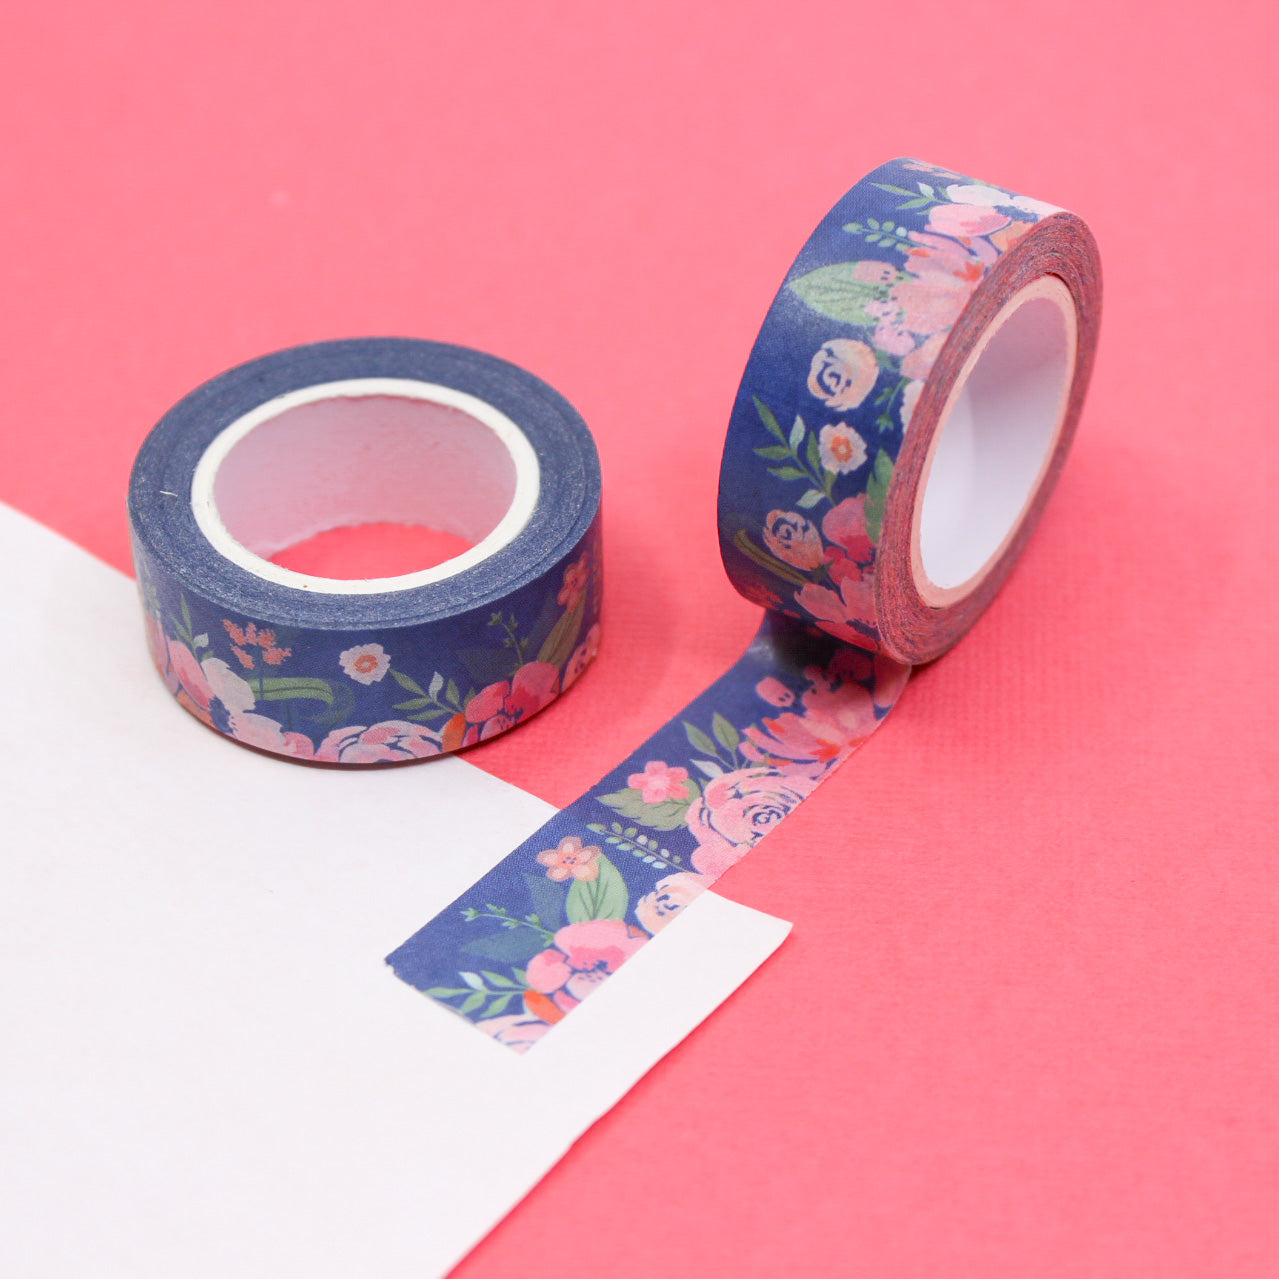 Elevate your crafts with our Navy Blue Floral Washi Tape, featuring a timeless floral pattern in a rich navy blue hue. Ideal for adding a touch of classic elegance to your projects. This tape is sold at BBB Supplies Craft Shop.